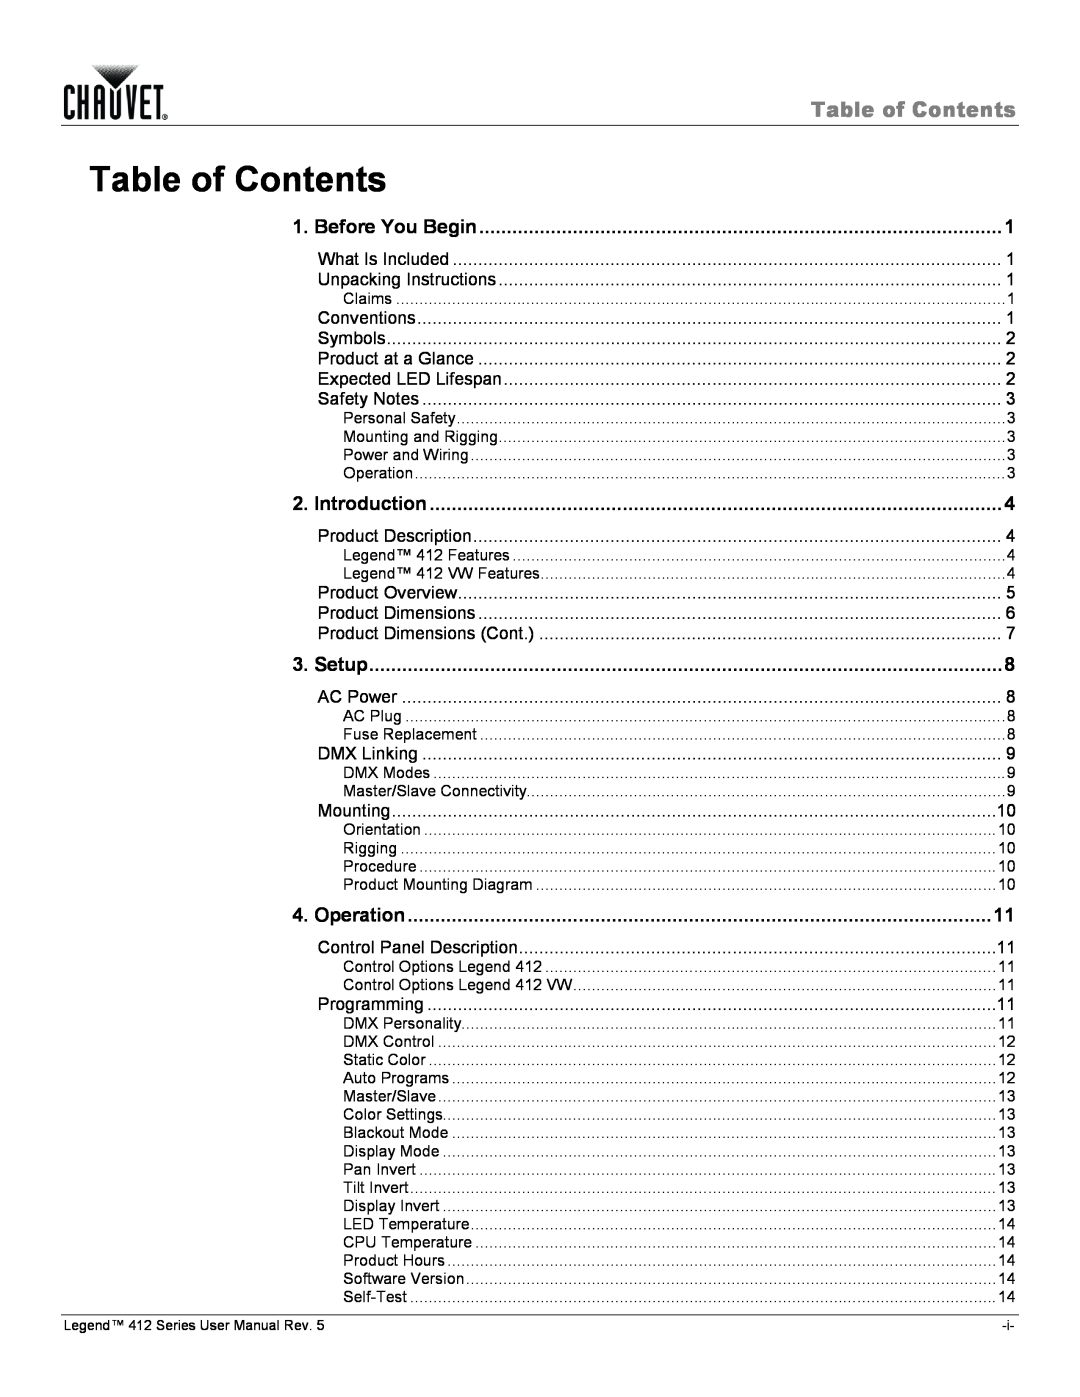 Chauvet 412VW user manual Table of Contents, Before You Begin, Introduction 